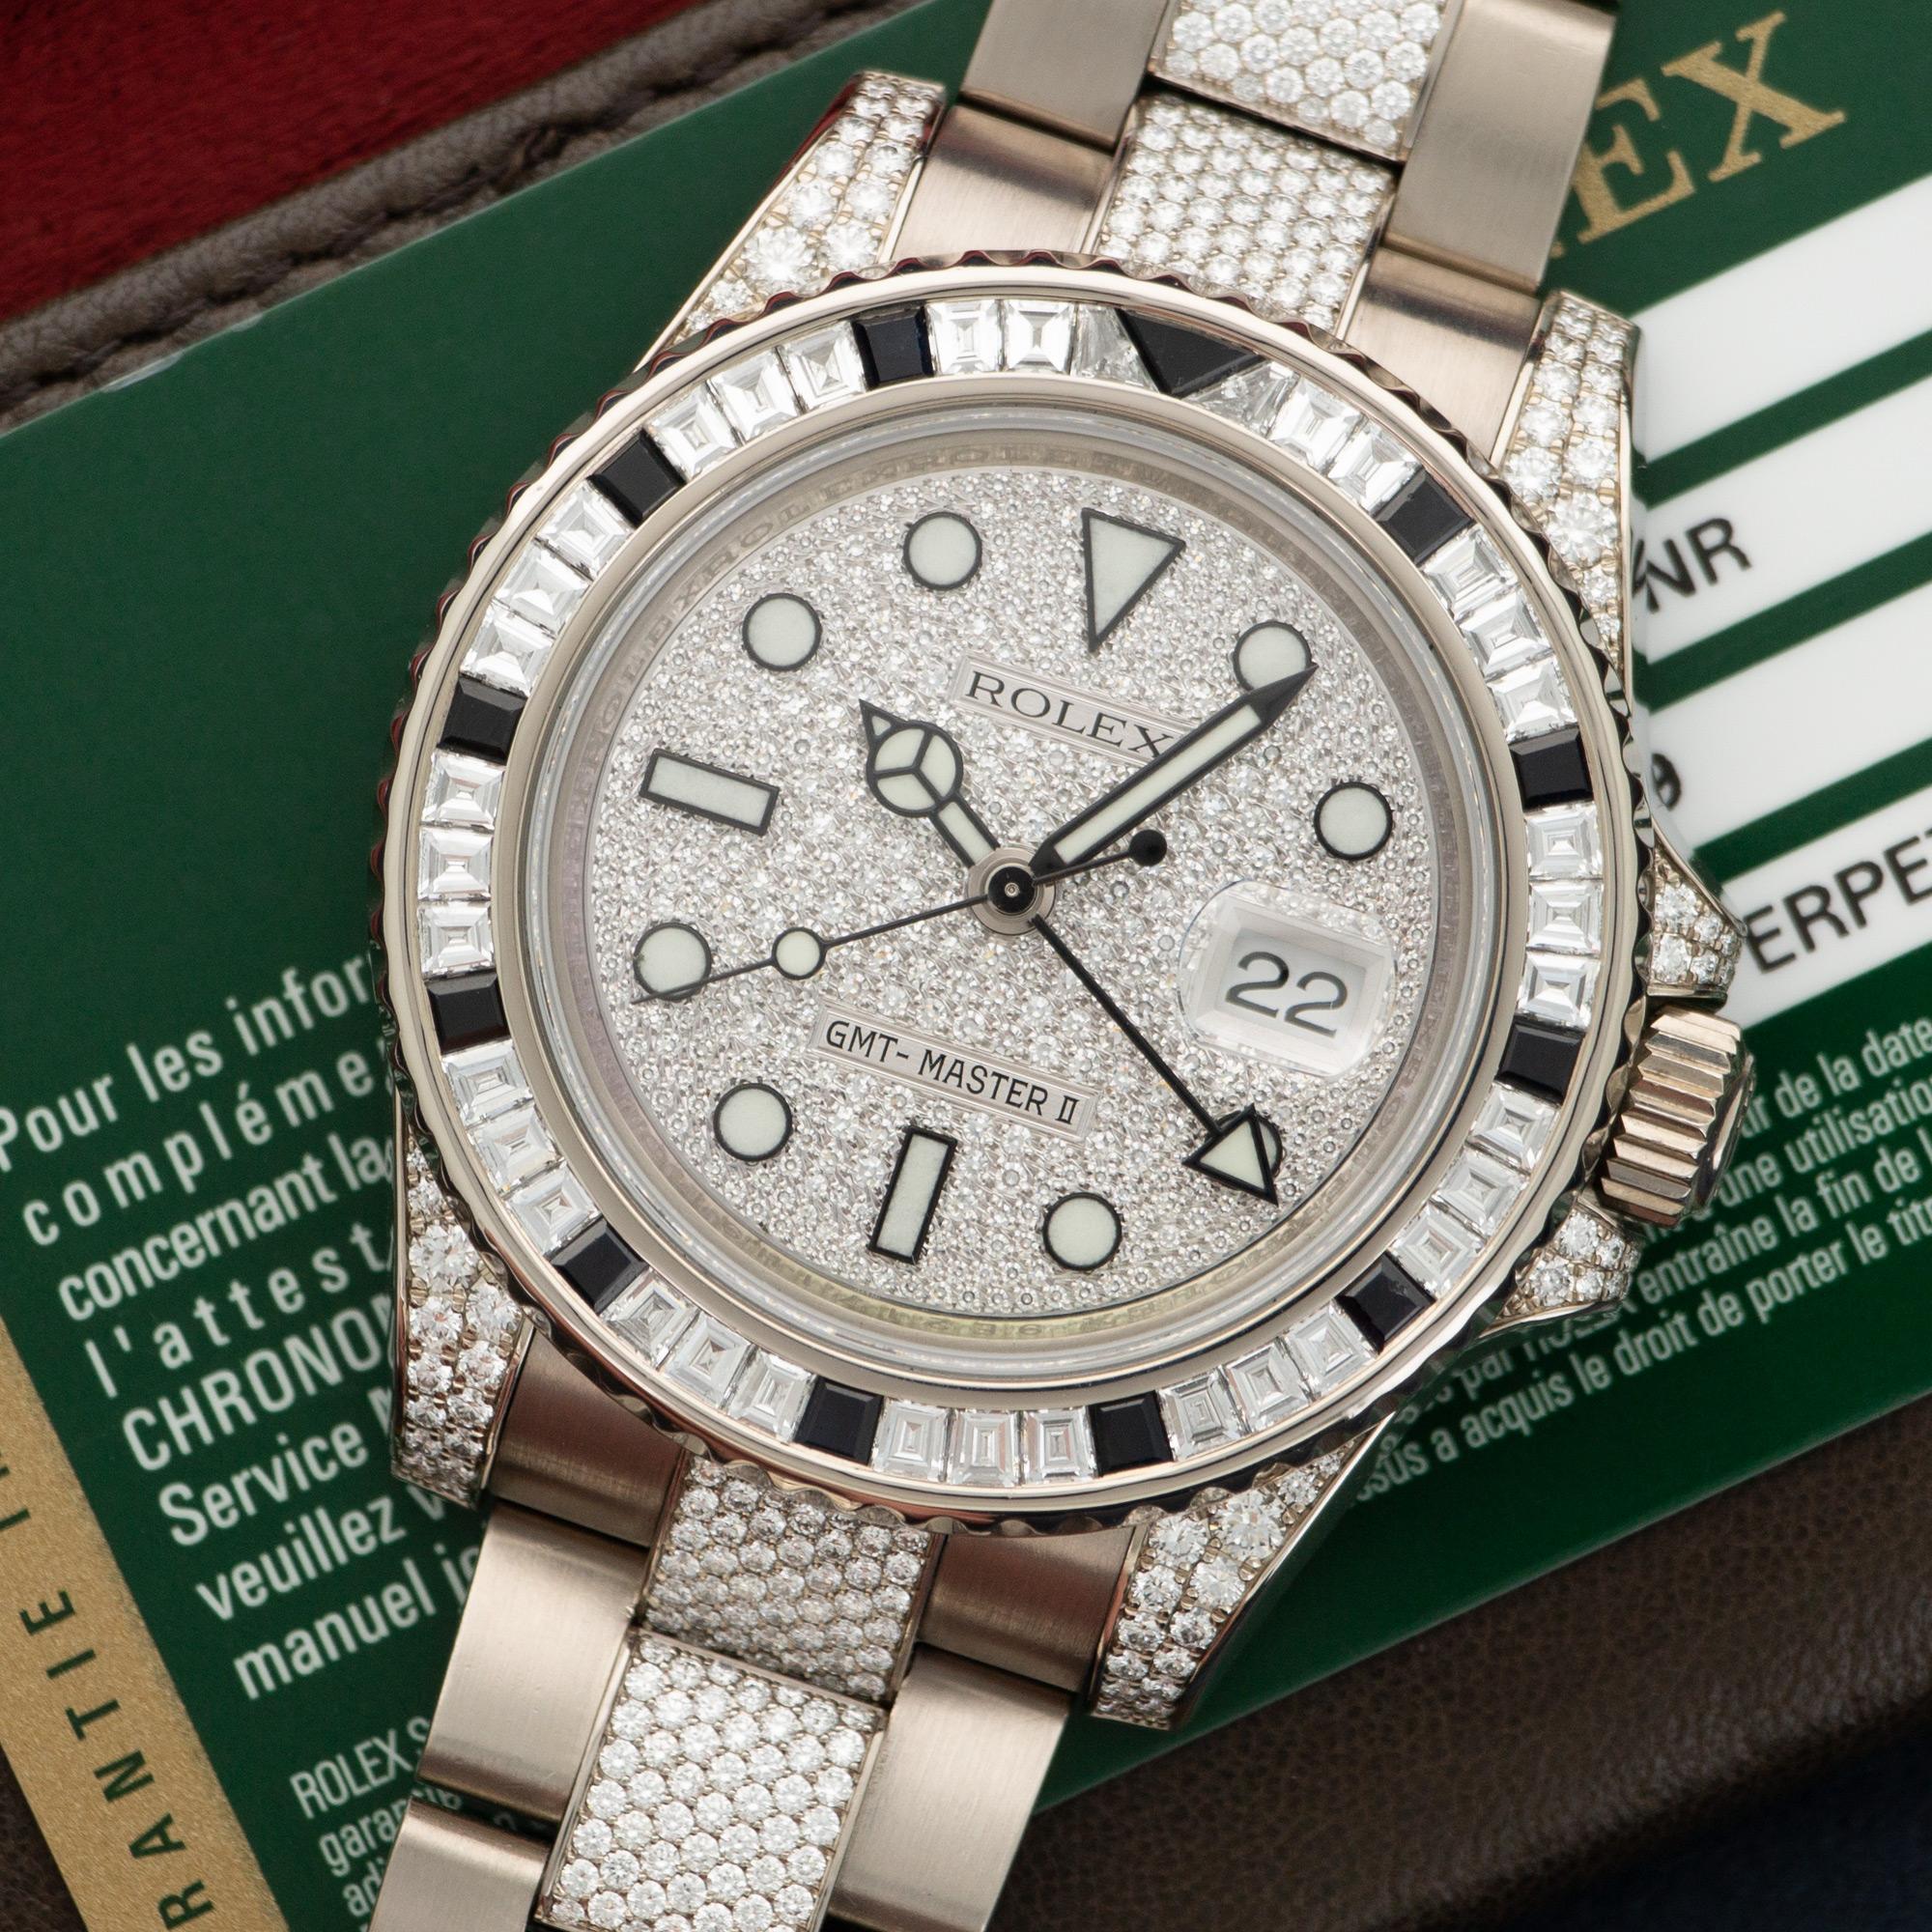 An 18k White Gold GMT-Master II Diamond Watch by Rolex. Model Number 116759SANR. All Original in Mint Condition with Box, Manuals, and Warranty Card.  Sold Originally in 2013 in a very limited production. 